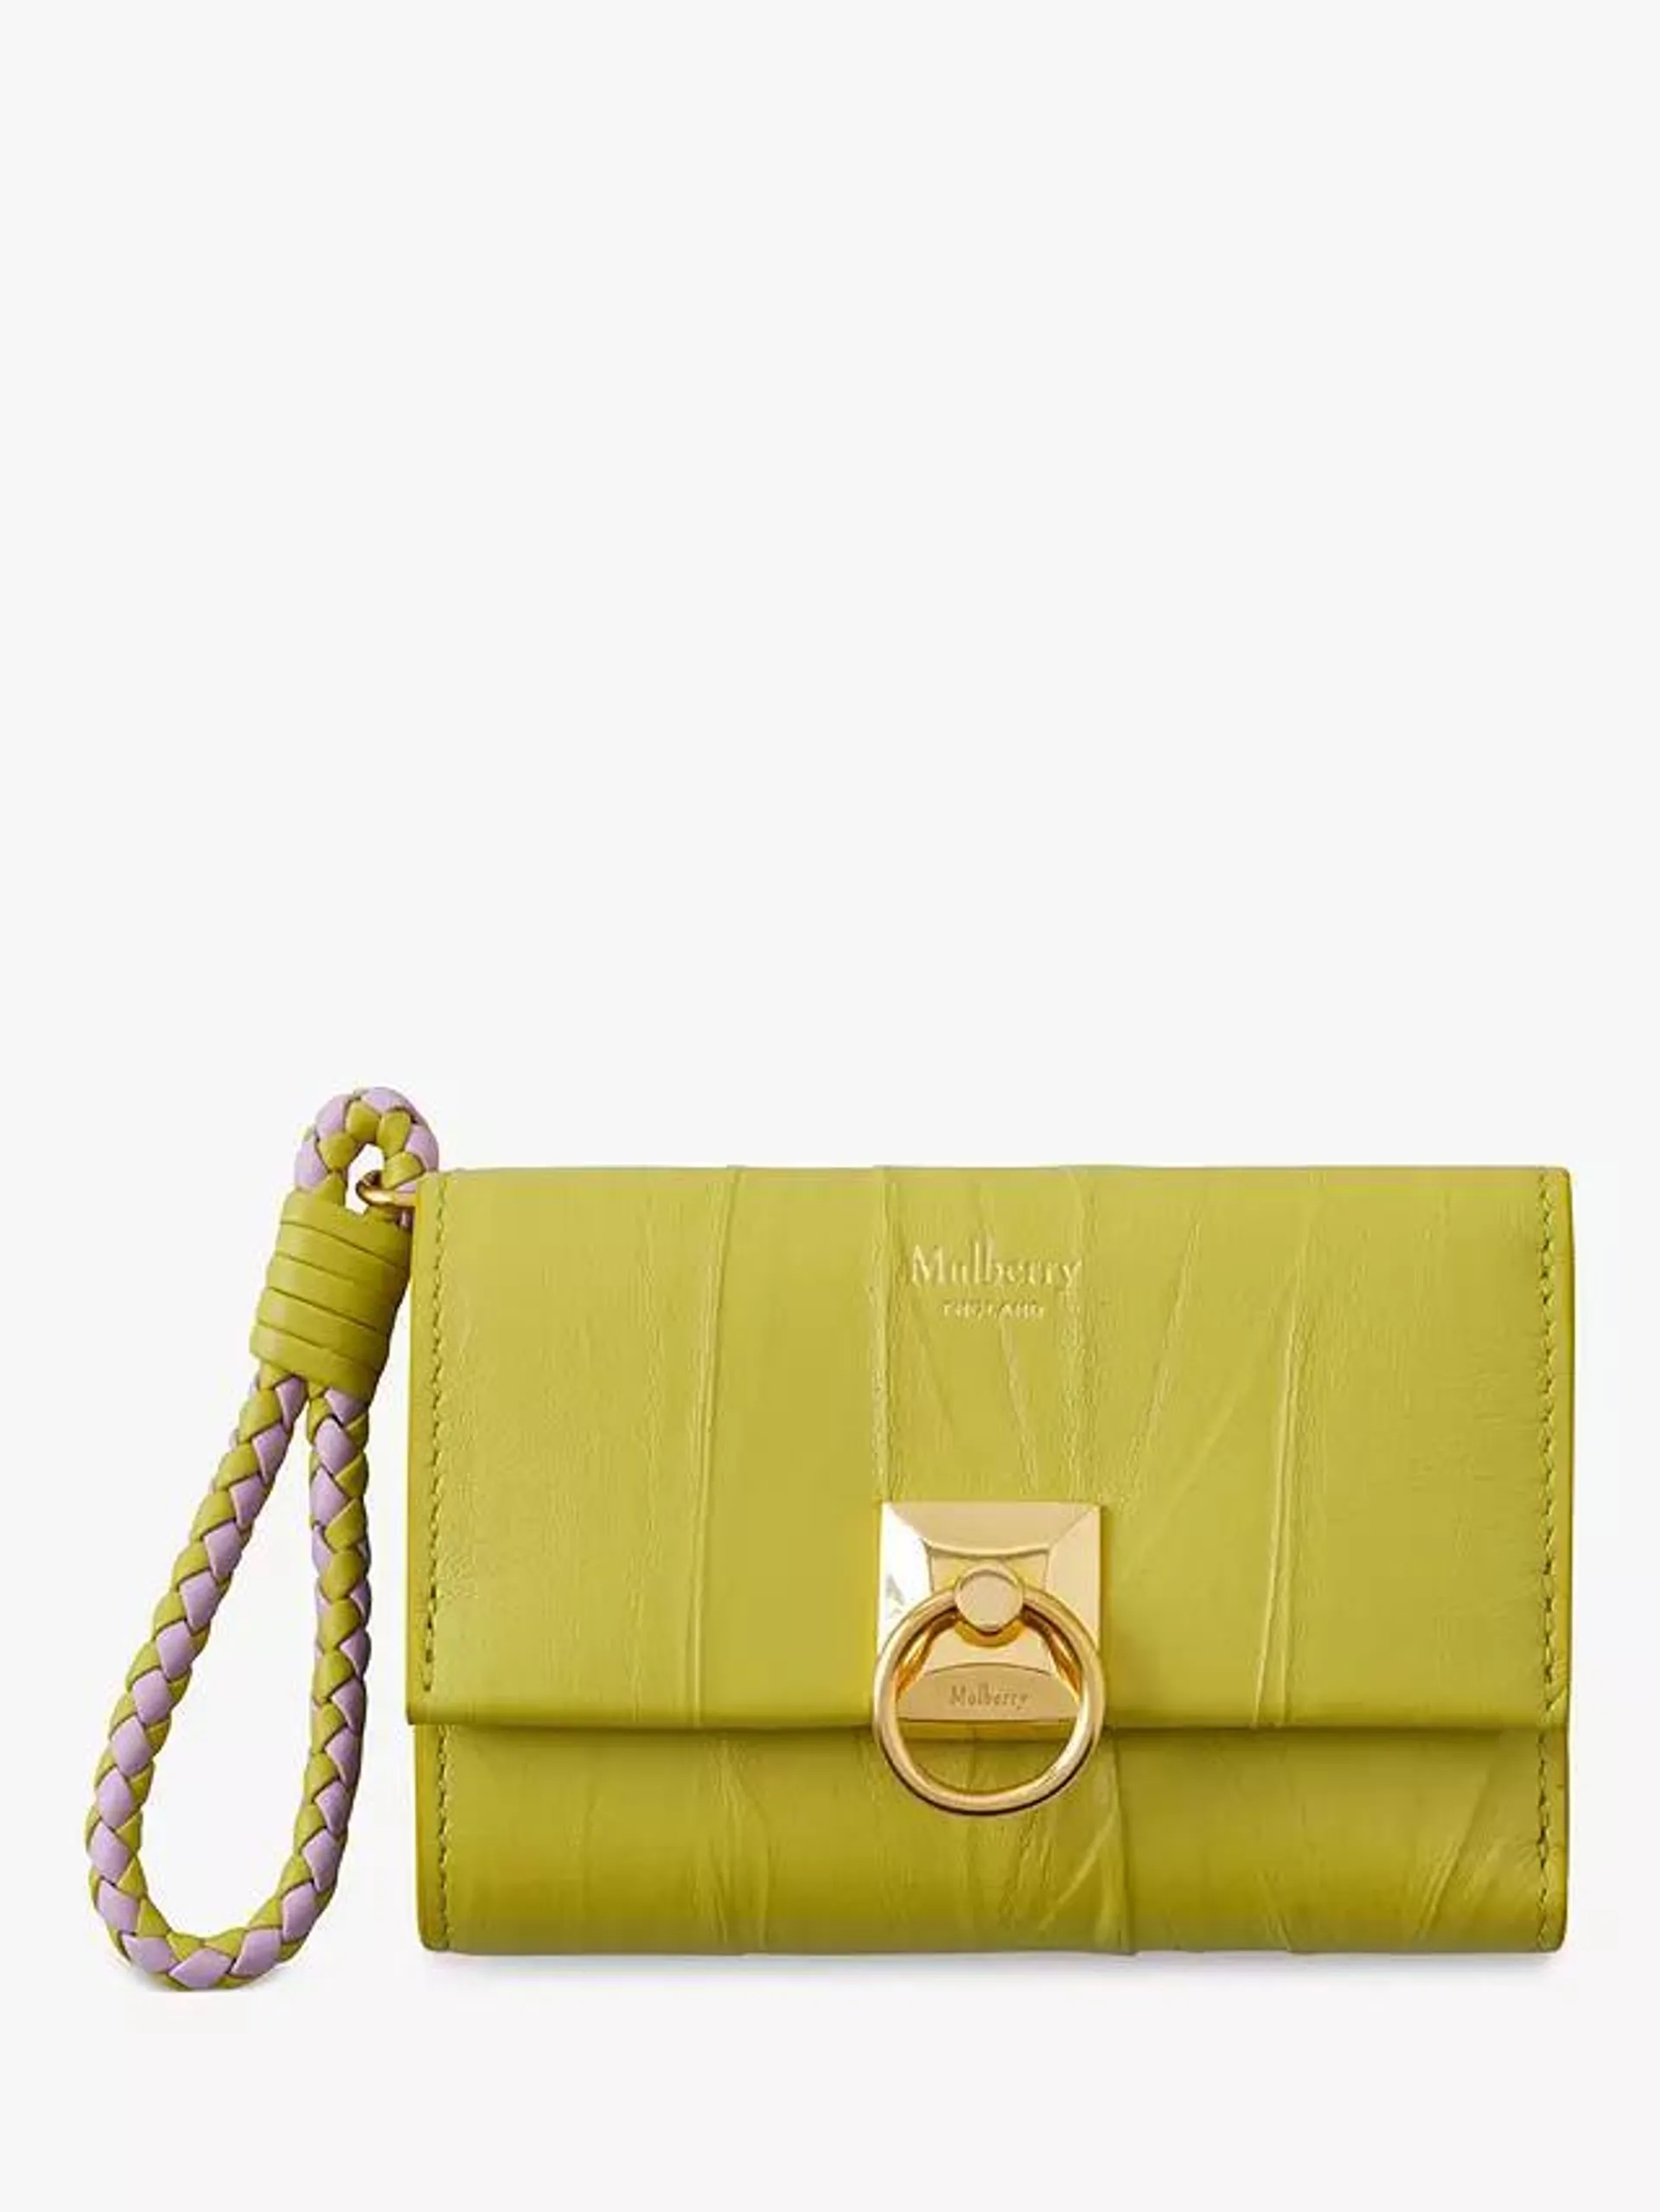 Mulberry Iris Crinkled Leather Trifold Wallet, Meadow Green